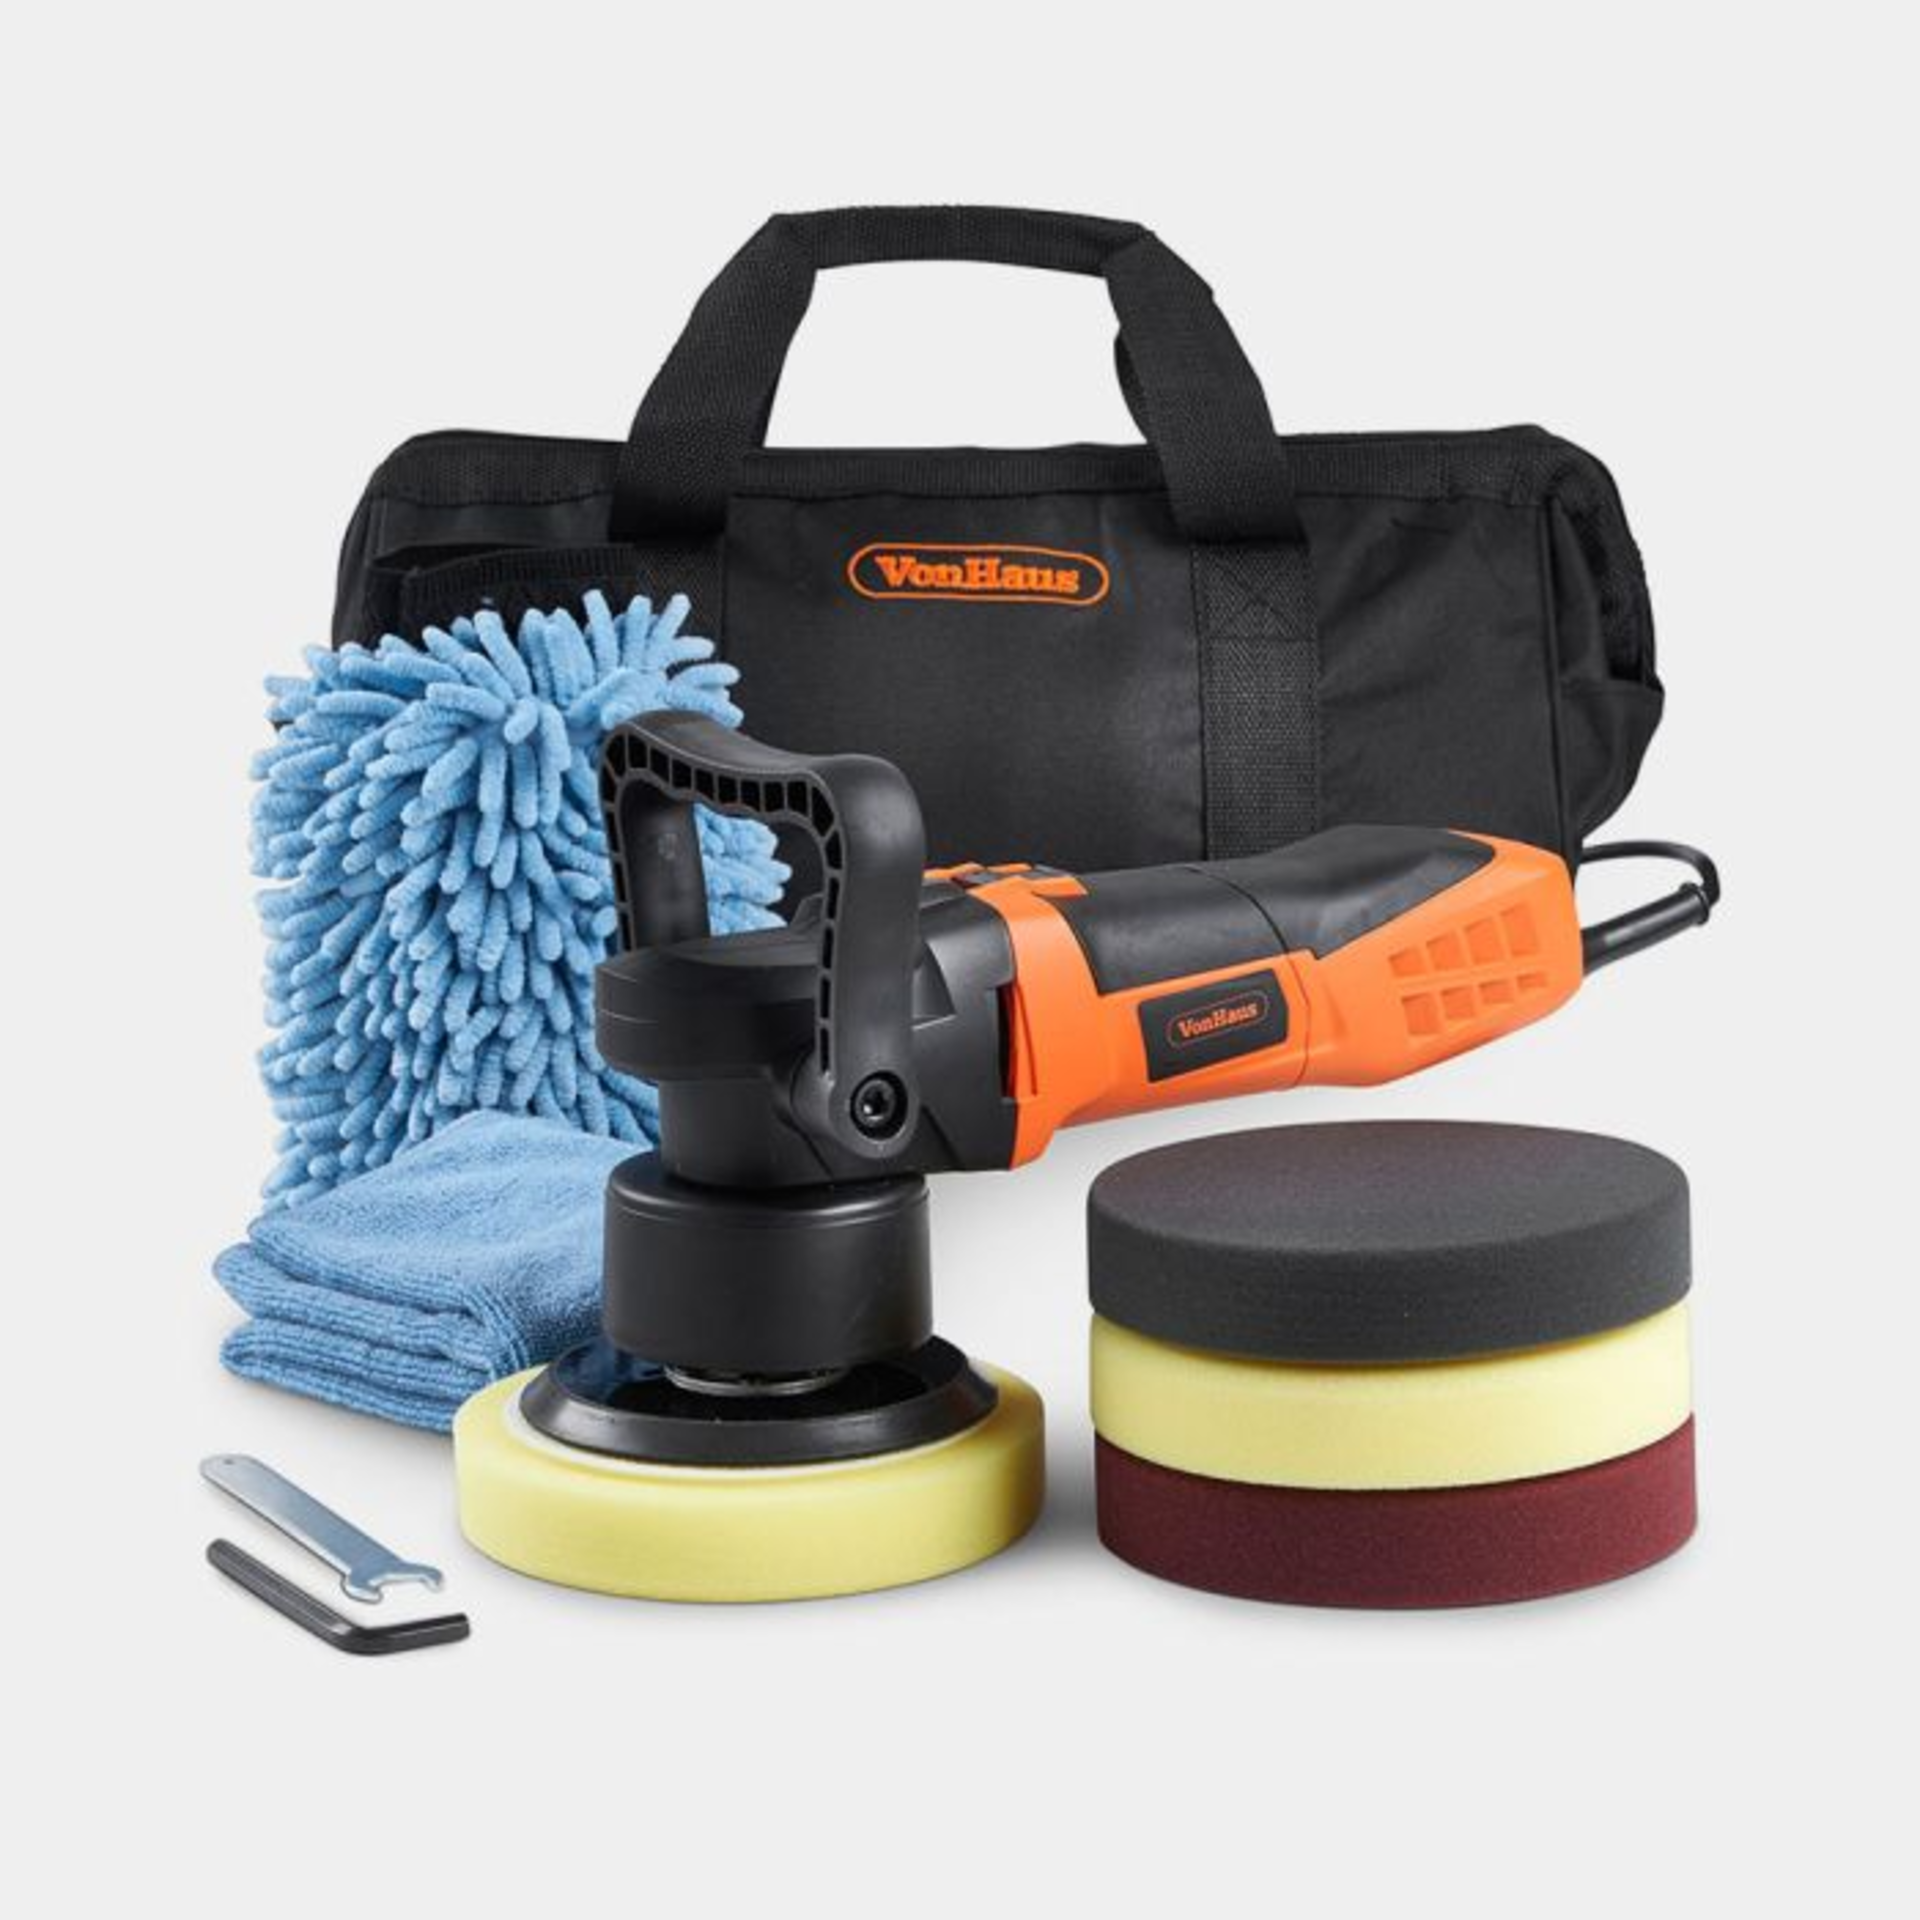 Dual Action Polisher Kit. - ER36. High shine, perfectly smooth and protected – achieve the finish